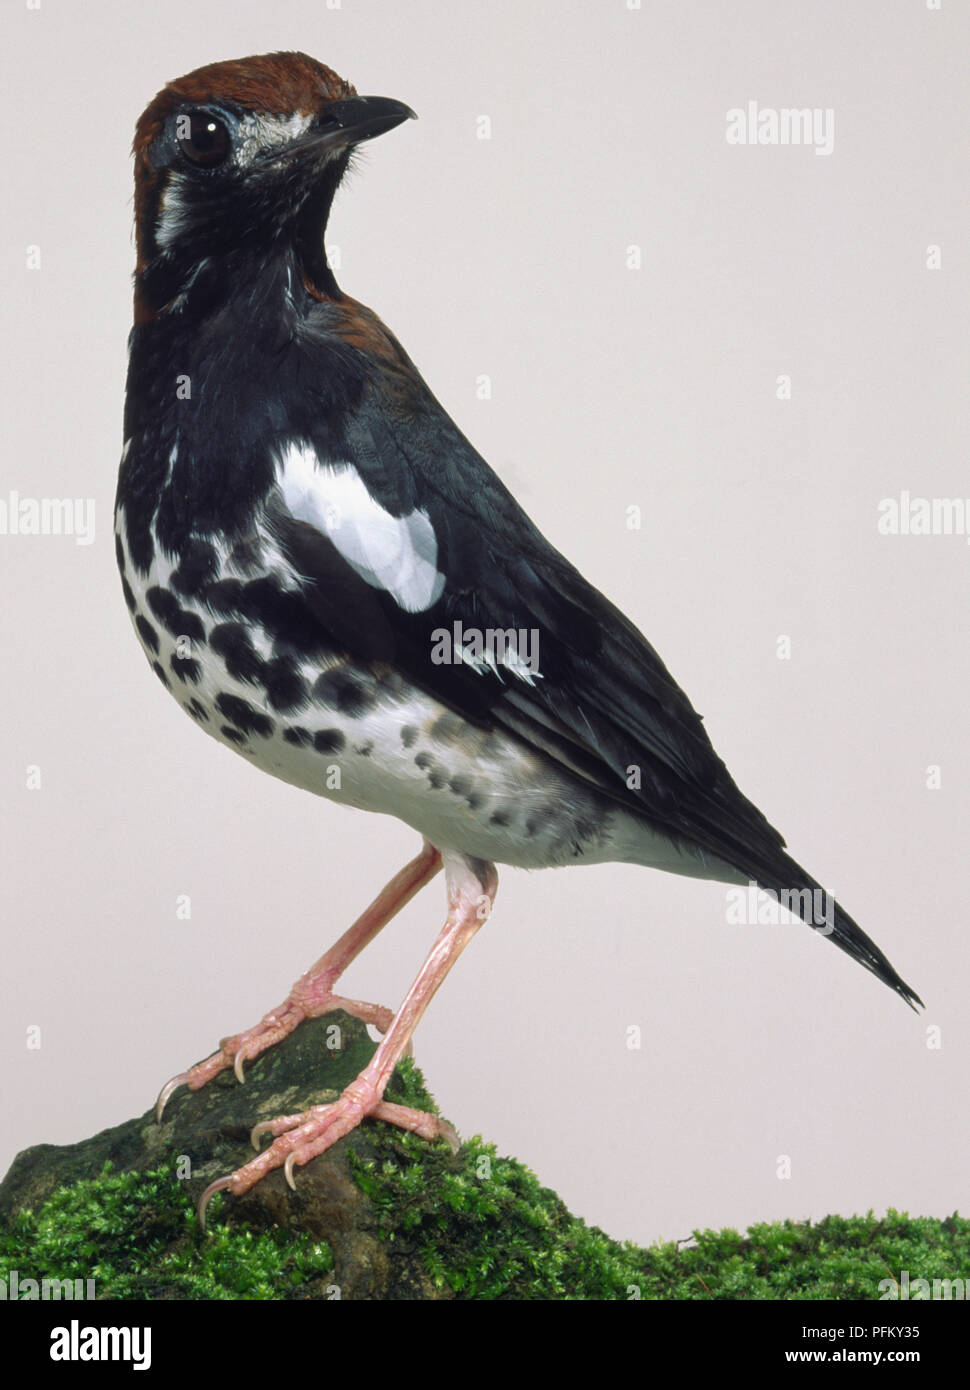 Side view of a Chestnut-Capped Thrush, perching on a moss-covered rock, showing its spotted belly and long legs. The head is in profile showing the large eye. Stock Photo